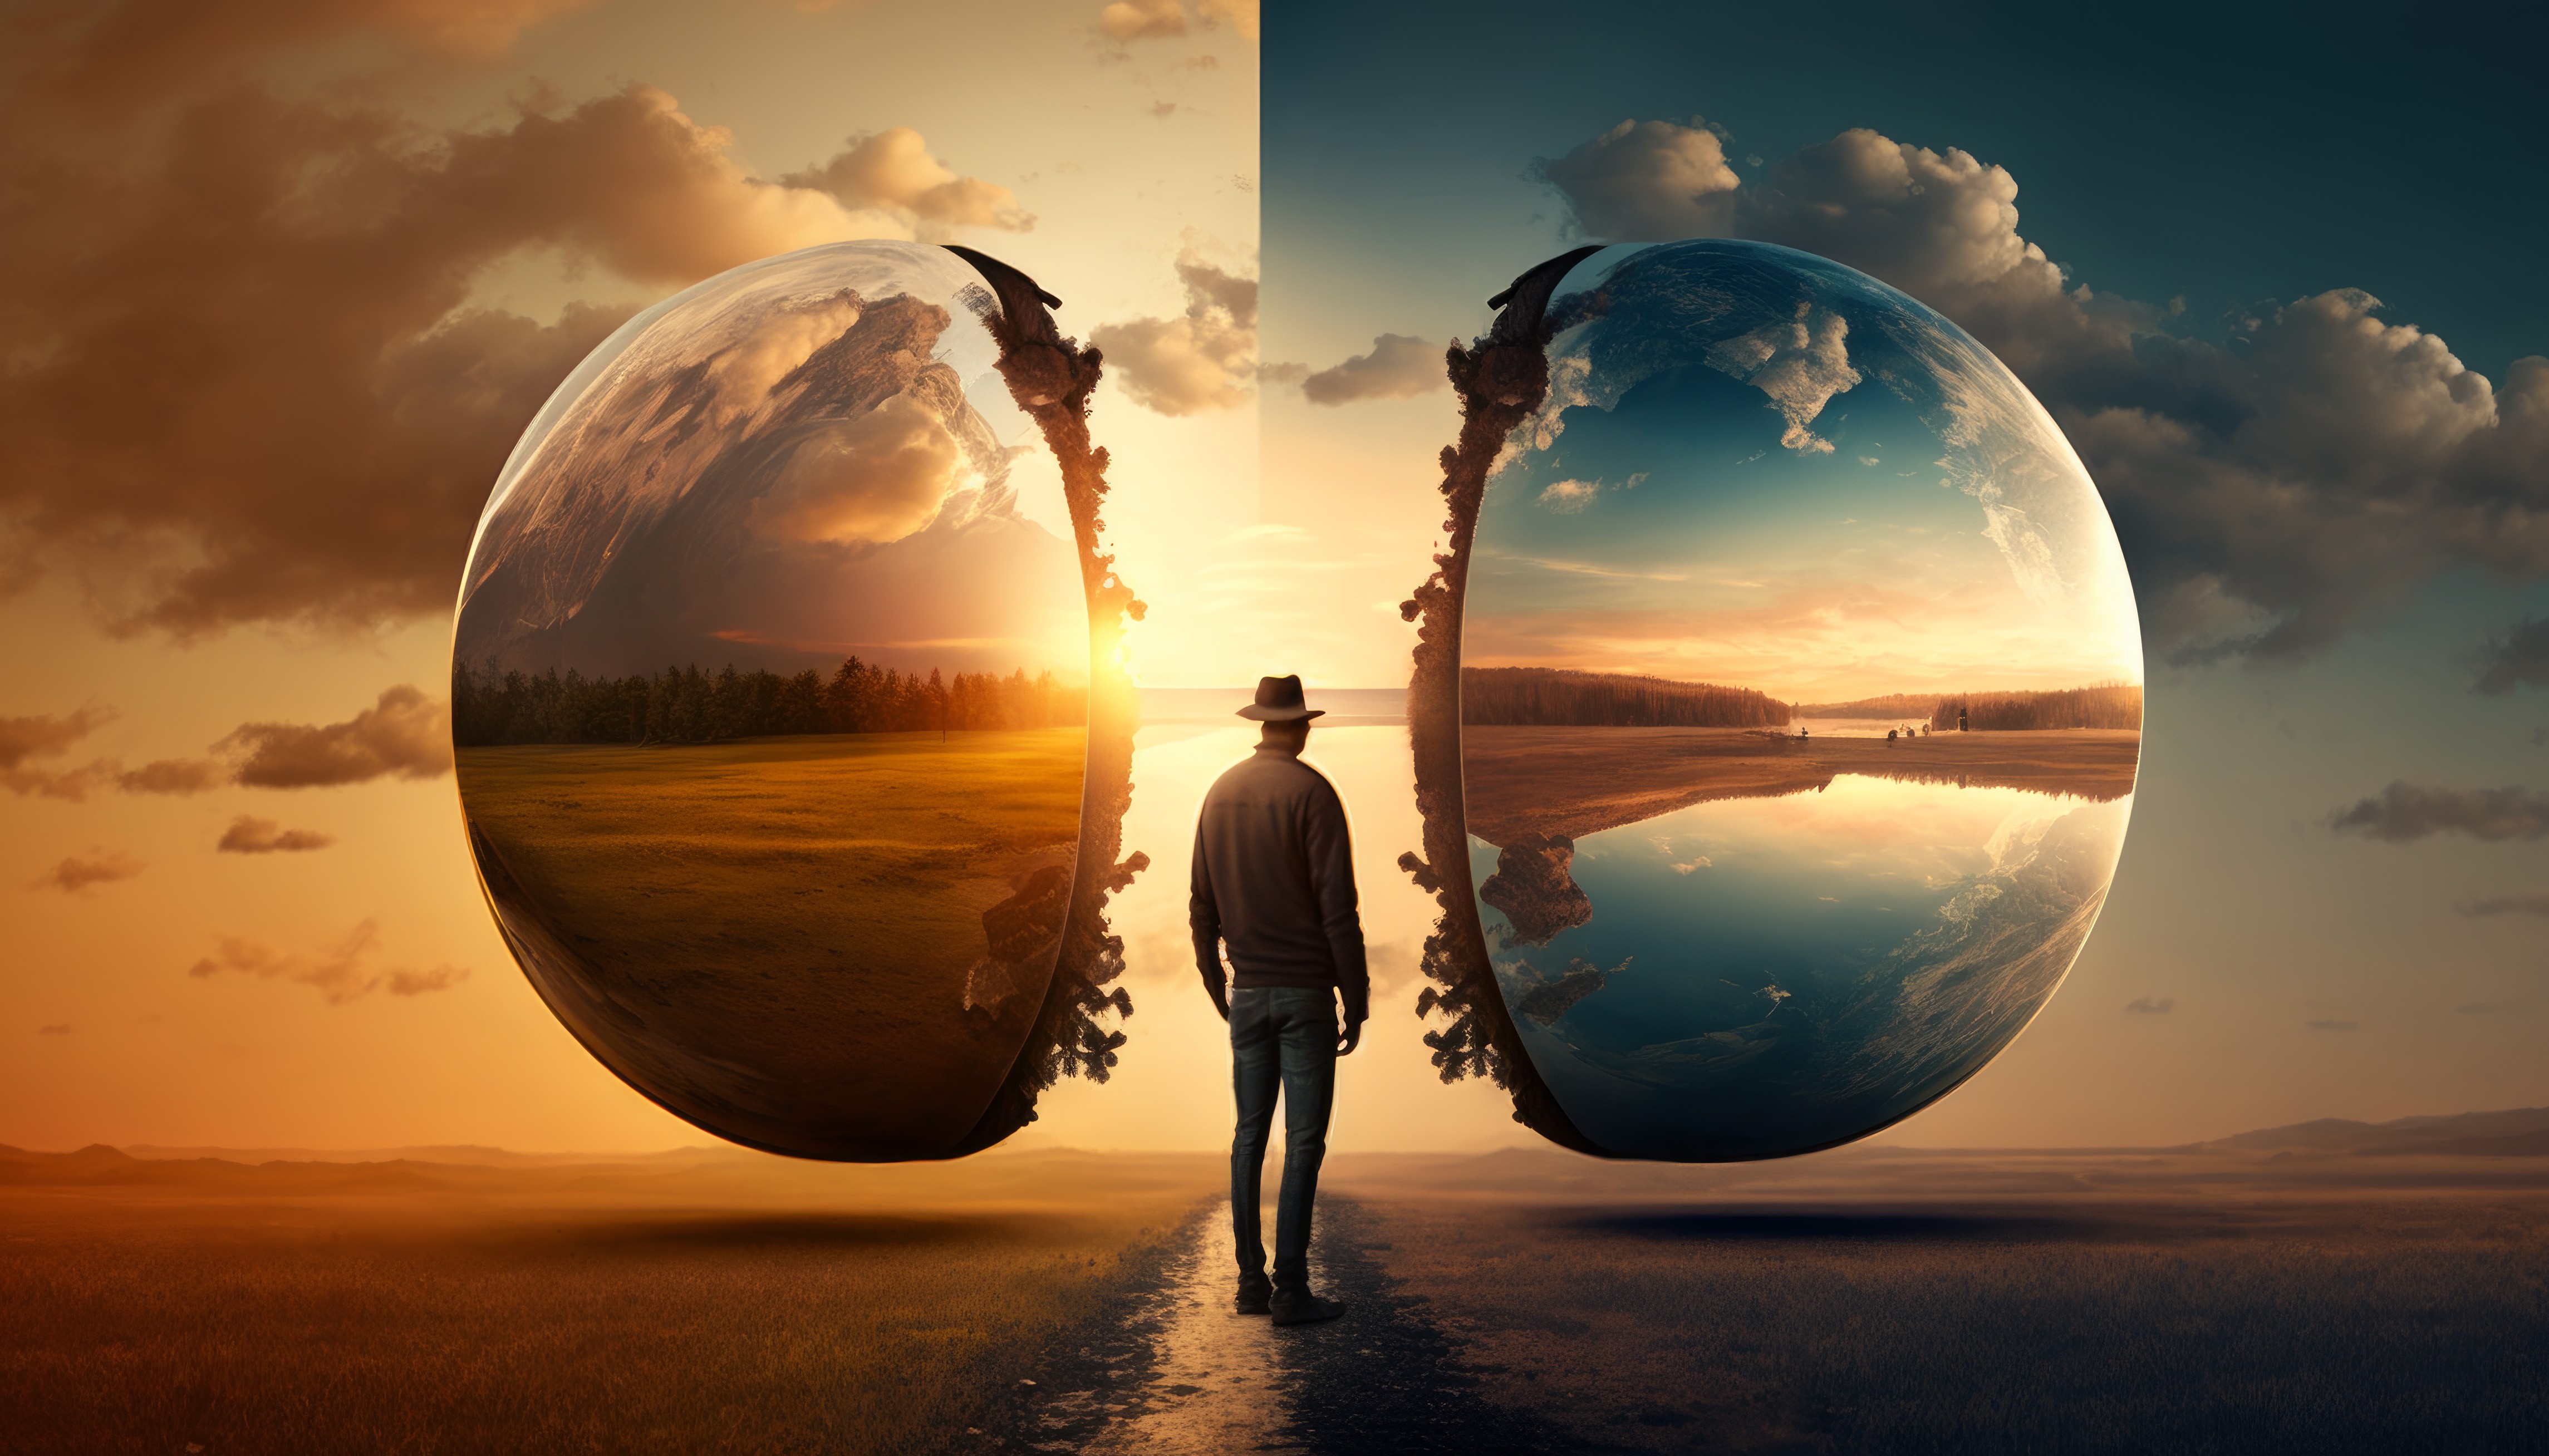 Ai Art Surreal Illustration World Bubbles Sunset Glow Sunset Clouds Sky Water Trees 4579x2616